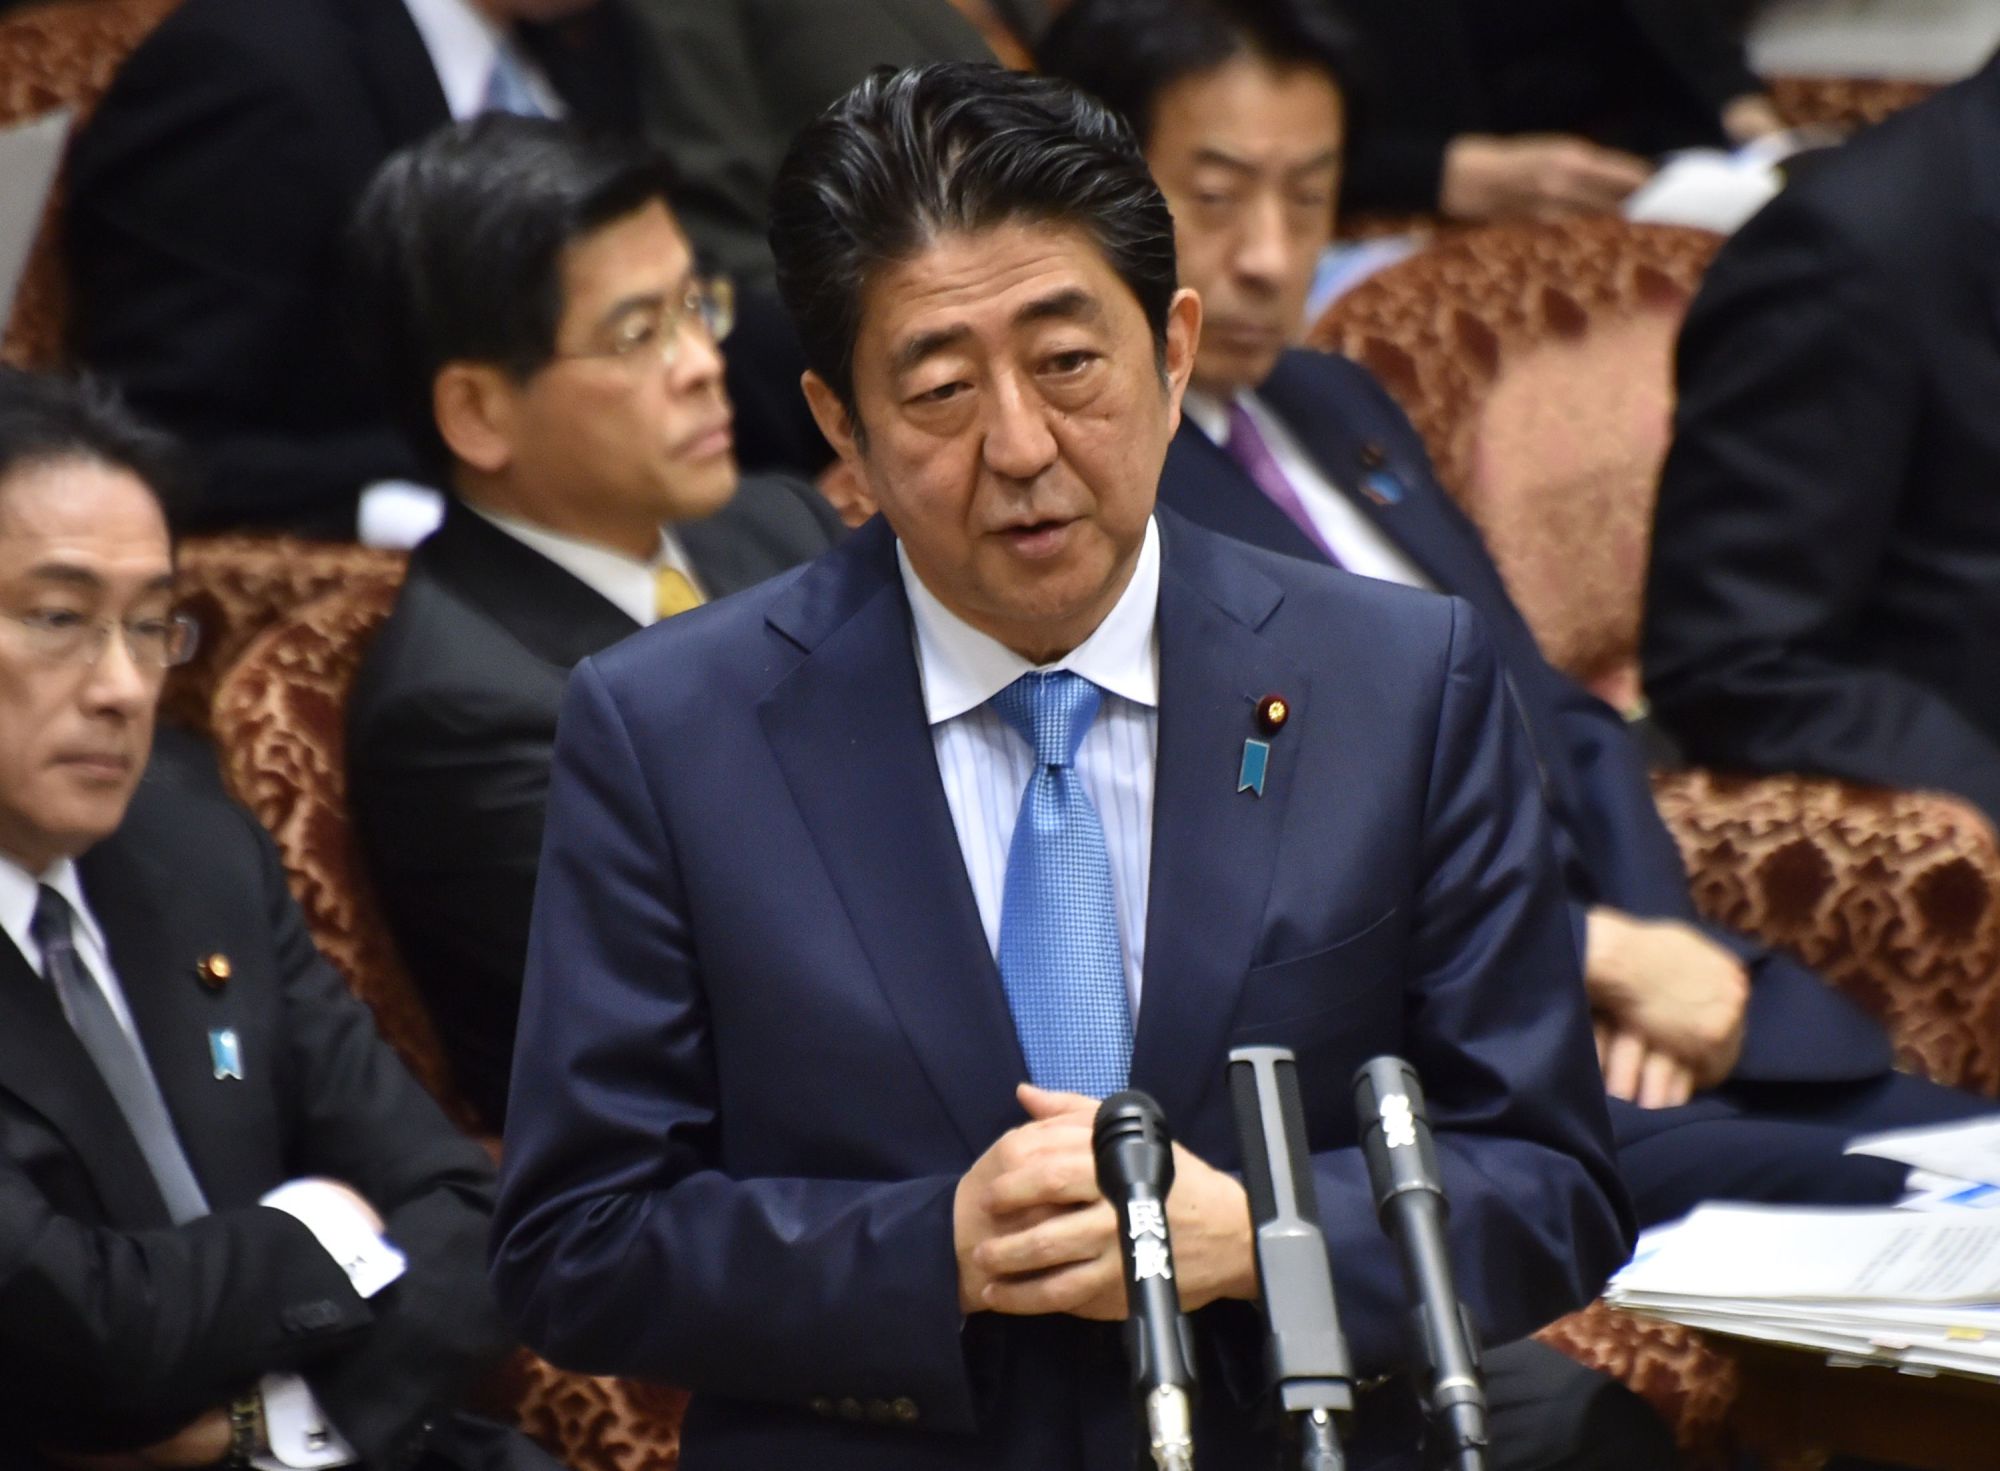 Prime Minister Shinzo Abe answers questions before the Upper House Budget Committee on Monday. | AFP-JIJI